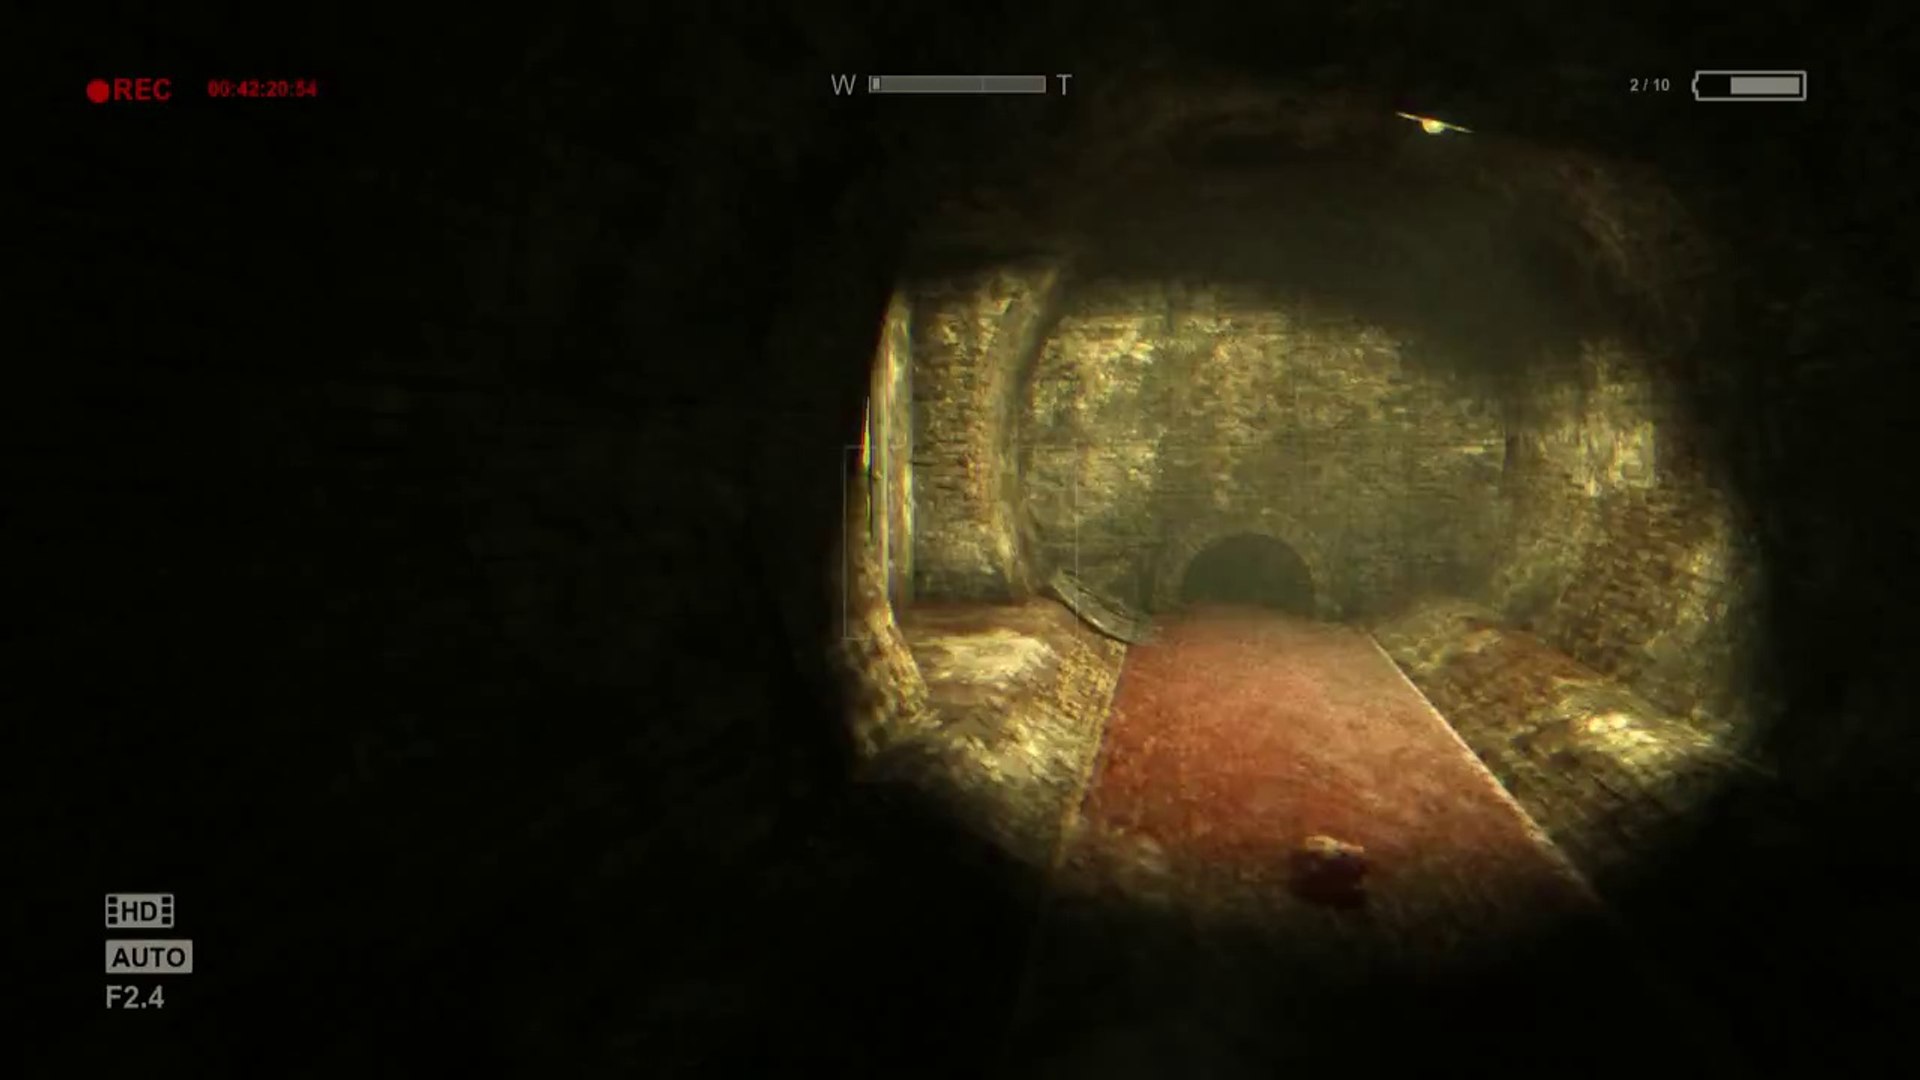 Post flamme Mikroprocessor Outlast PS4 Walkthrough Part 5 - ESCAPE THE SEWER! - video Dailymotion